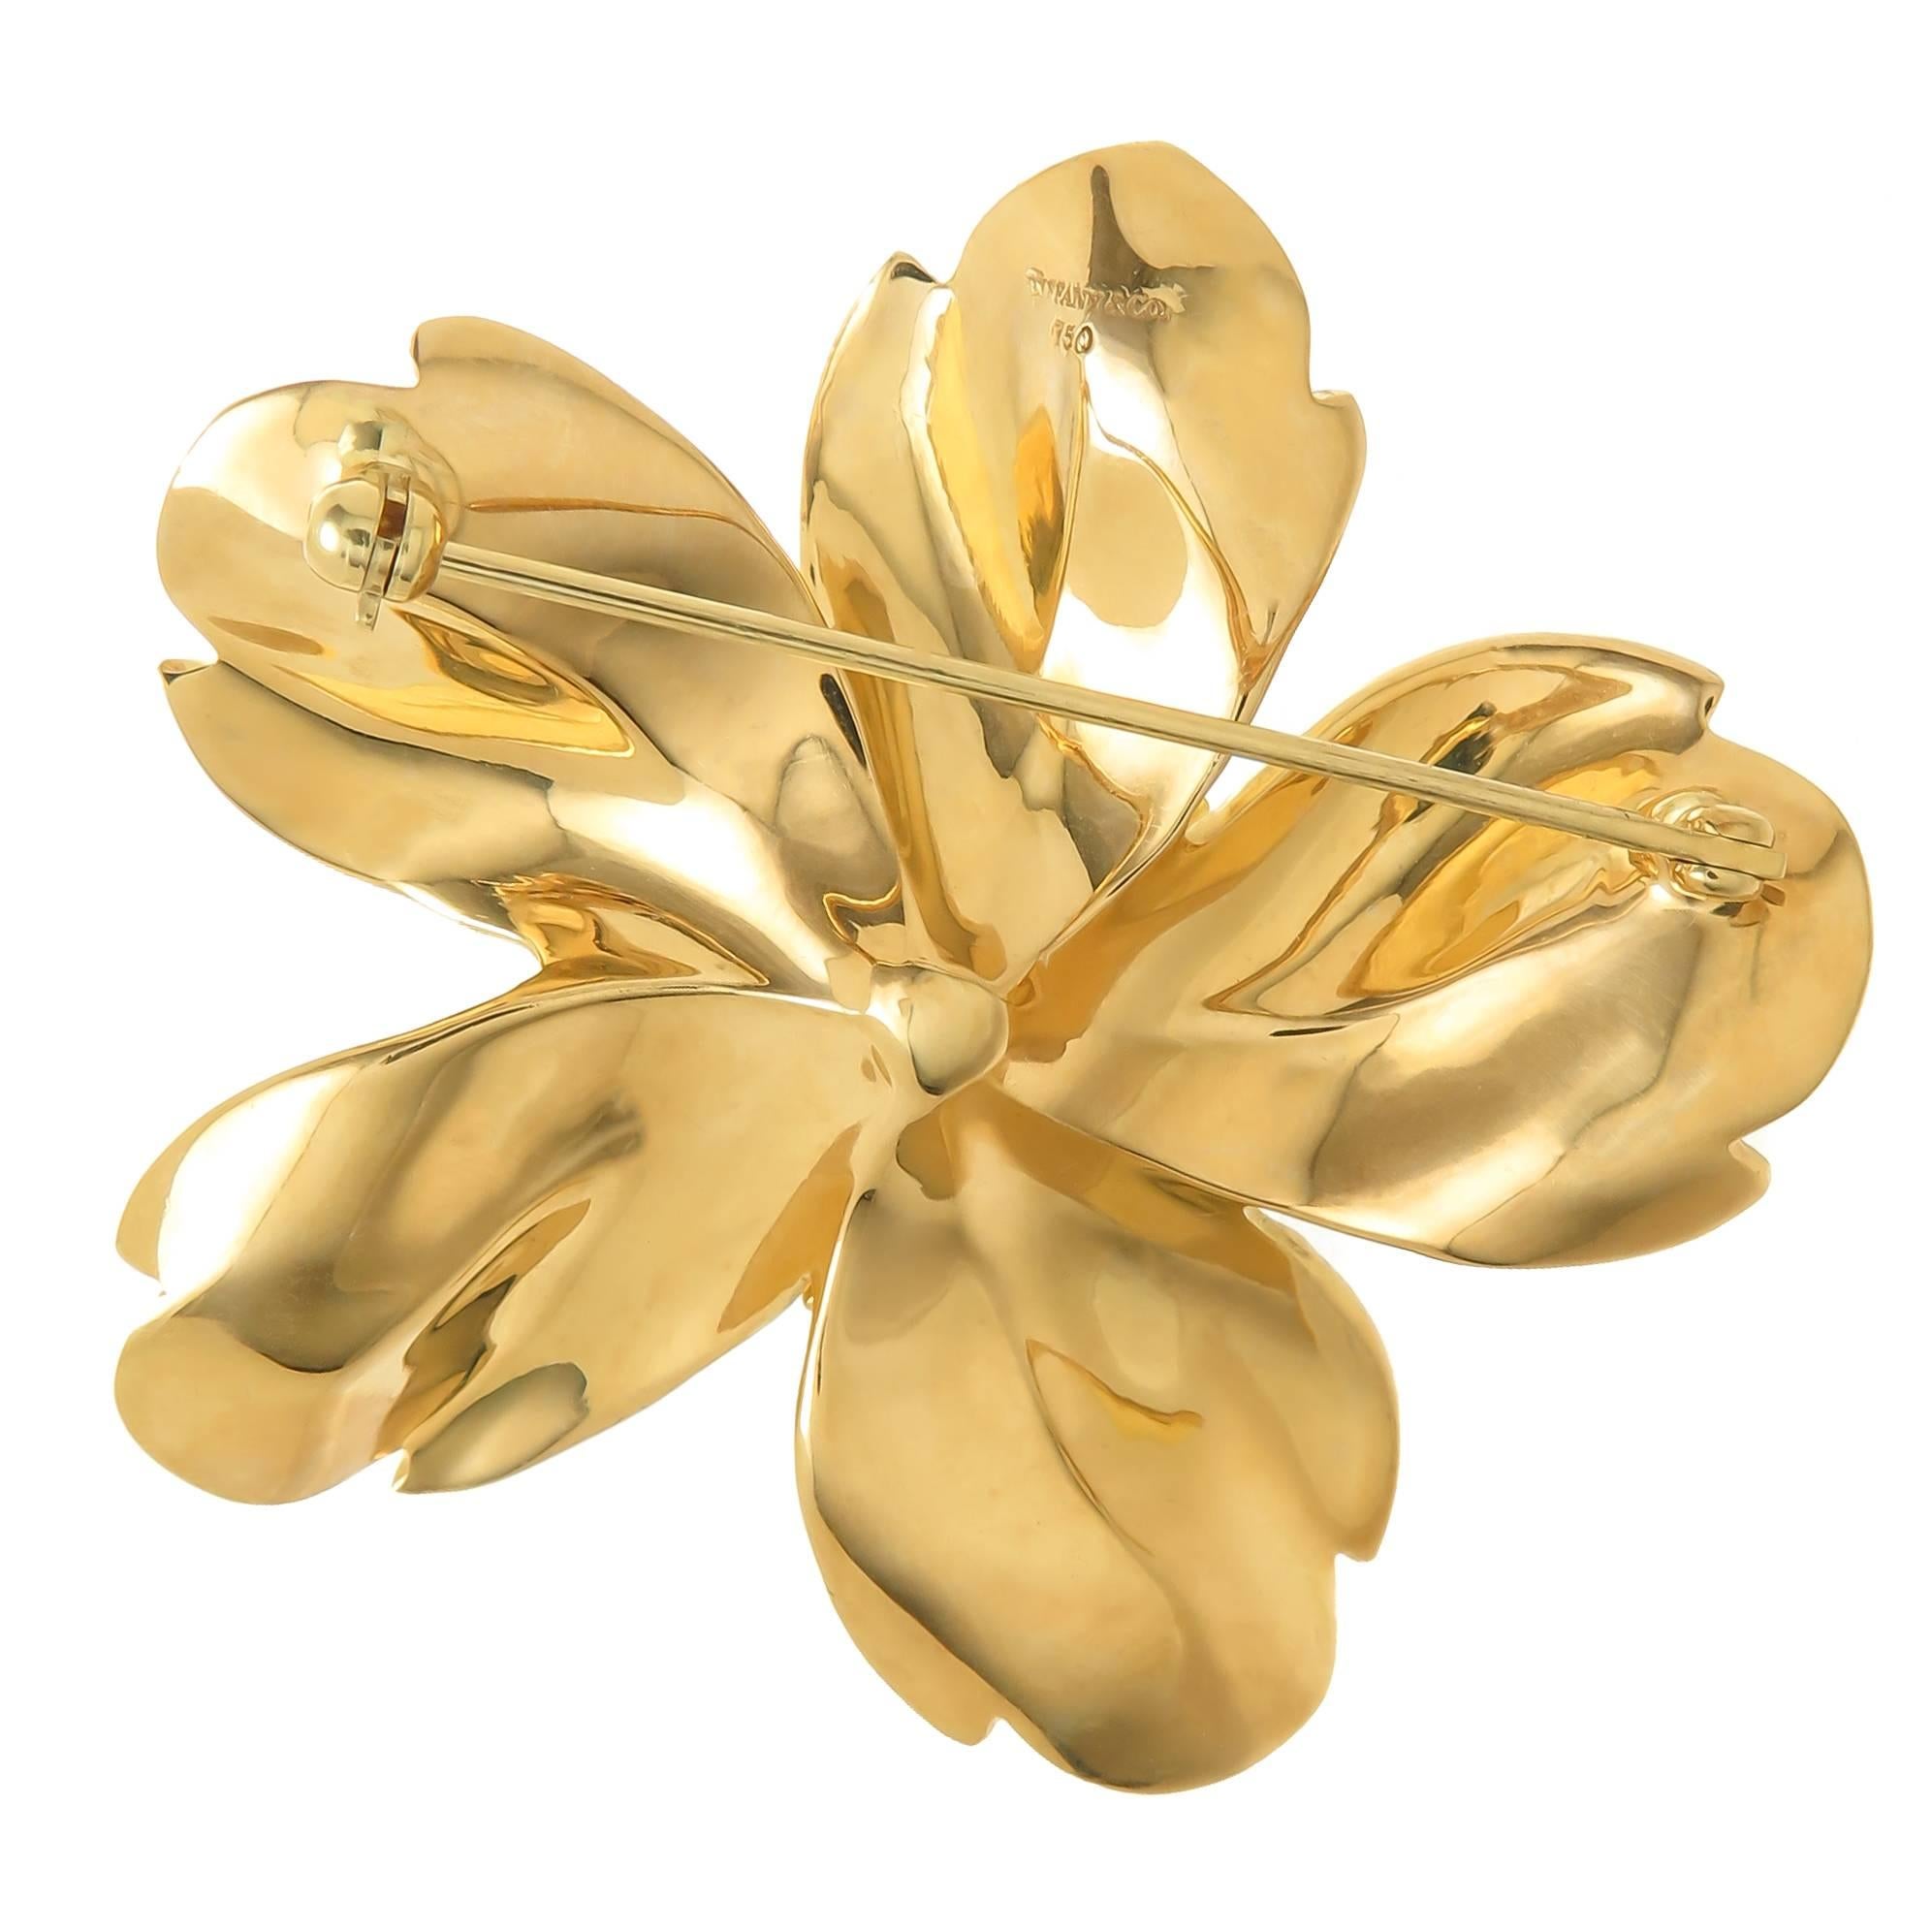 Circa 2000 Tiffany & Company 18K yellow Gold Flower Brooch, measuring 2 inch in diameter and weighing 34 Grams. Very Detailed with a light frosted, brushed finish. Excellent condition. Comes in a Tiffany Gift Box. 